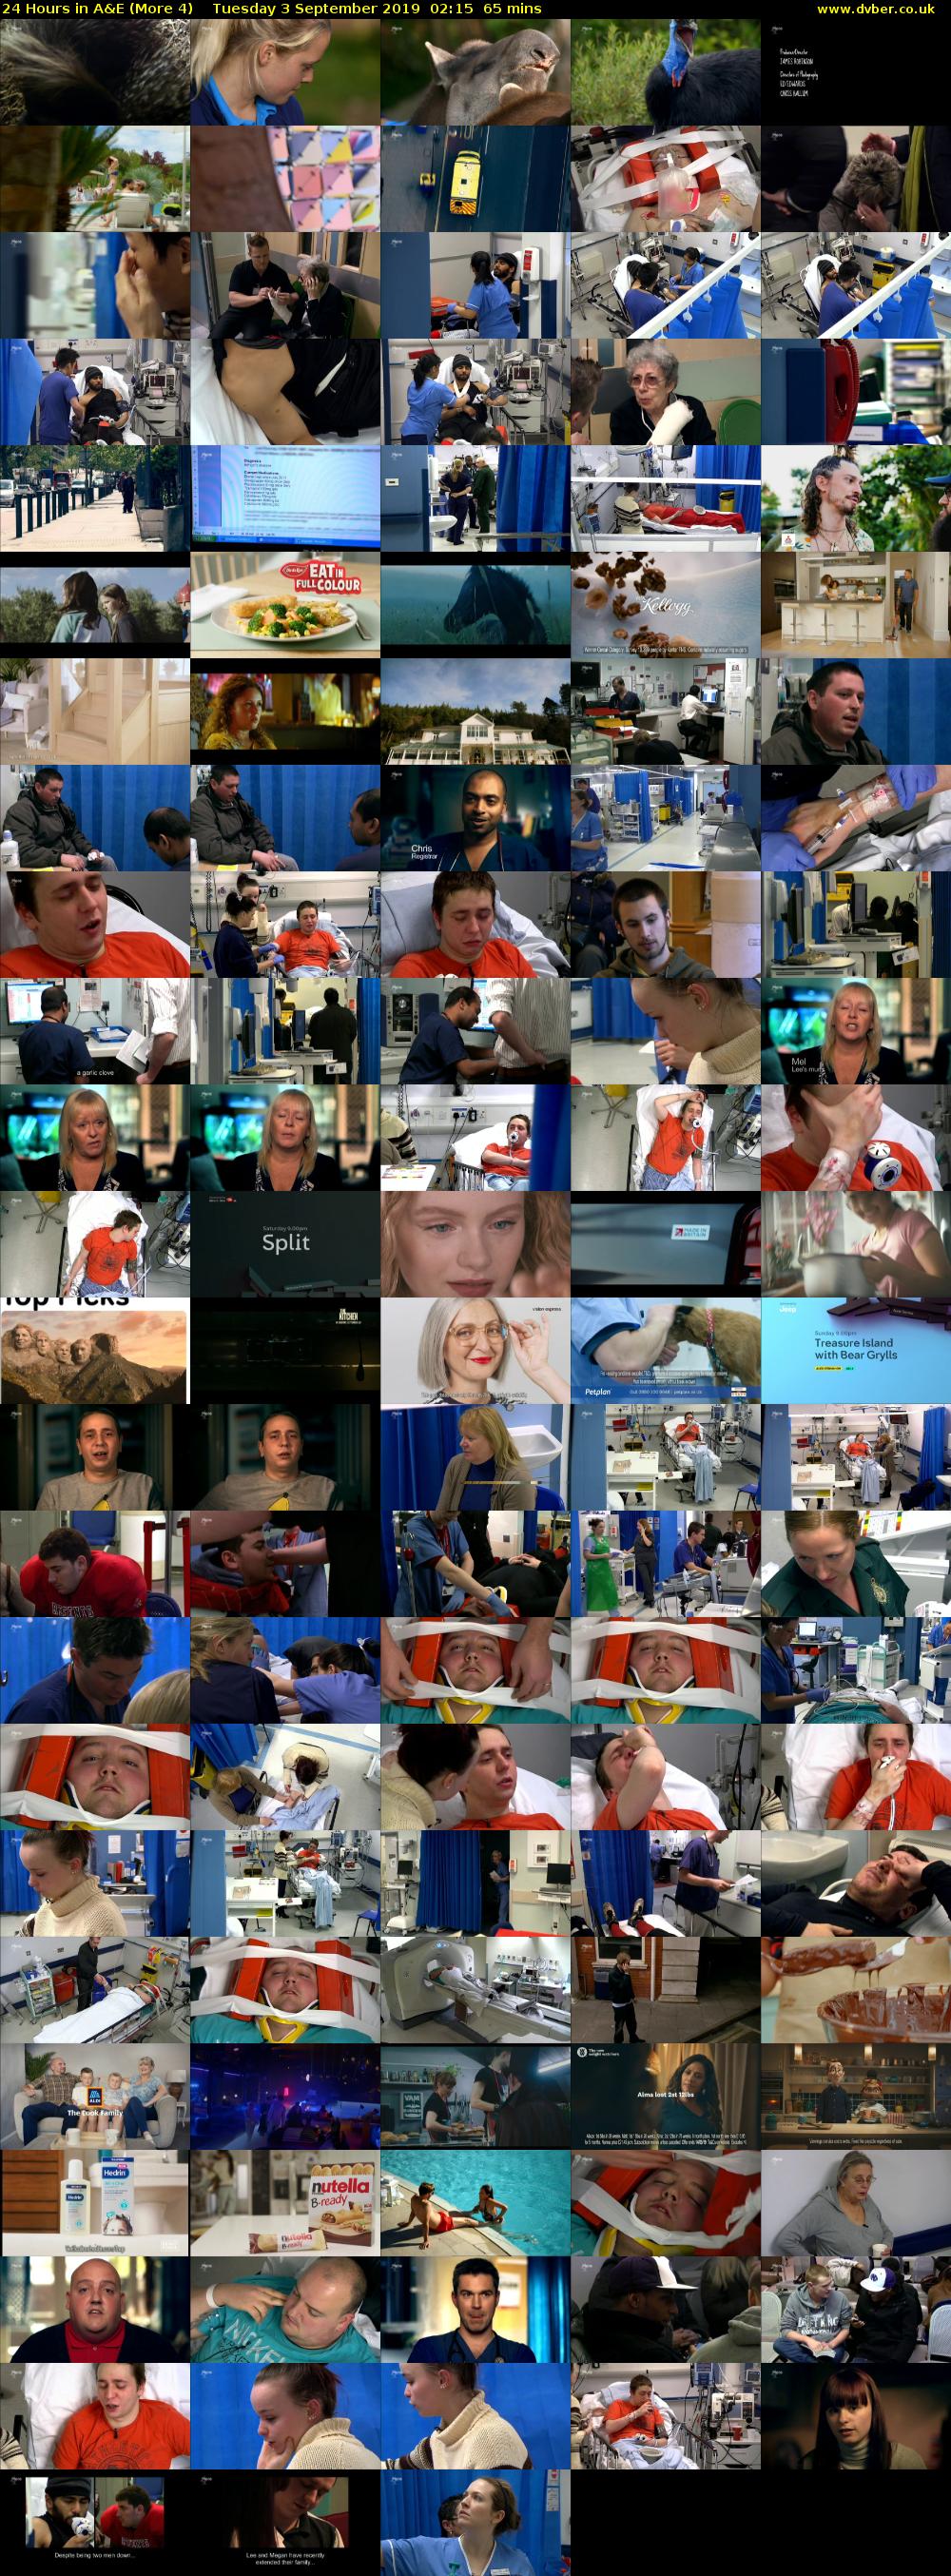 24 Hours in A&E (More 4) Tuesday 3 September 2019 02:15 - 03:20